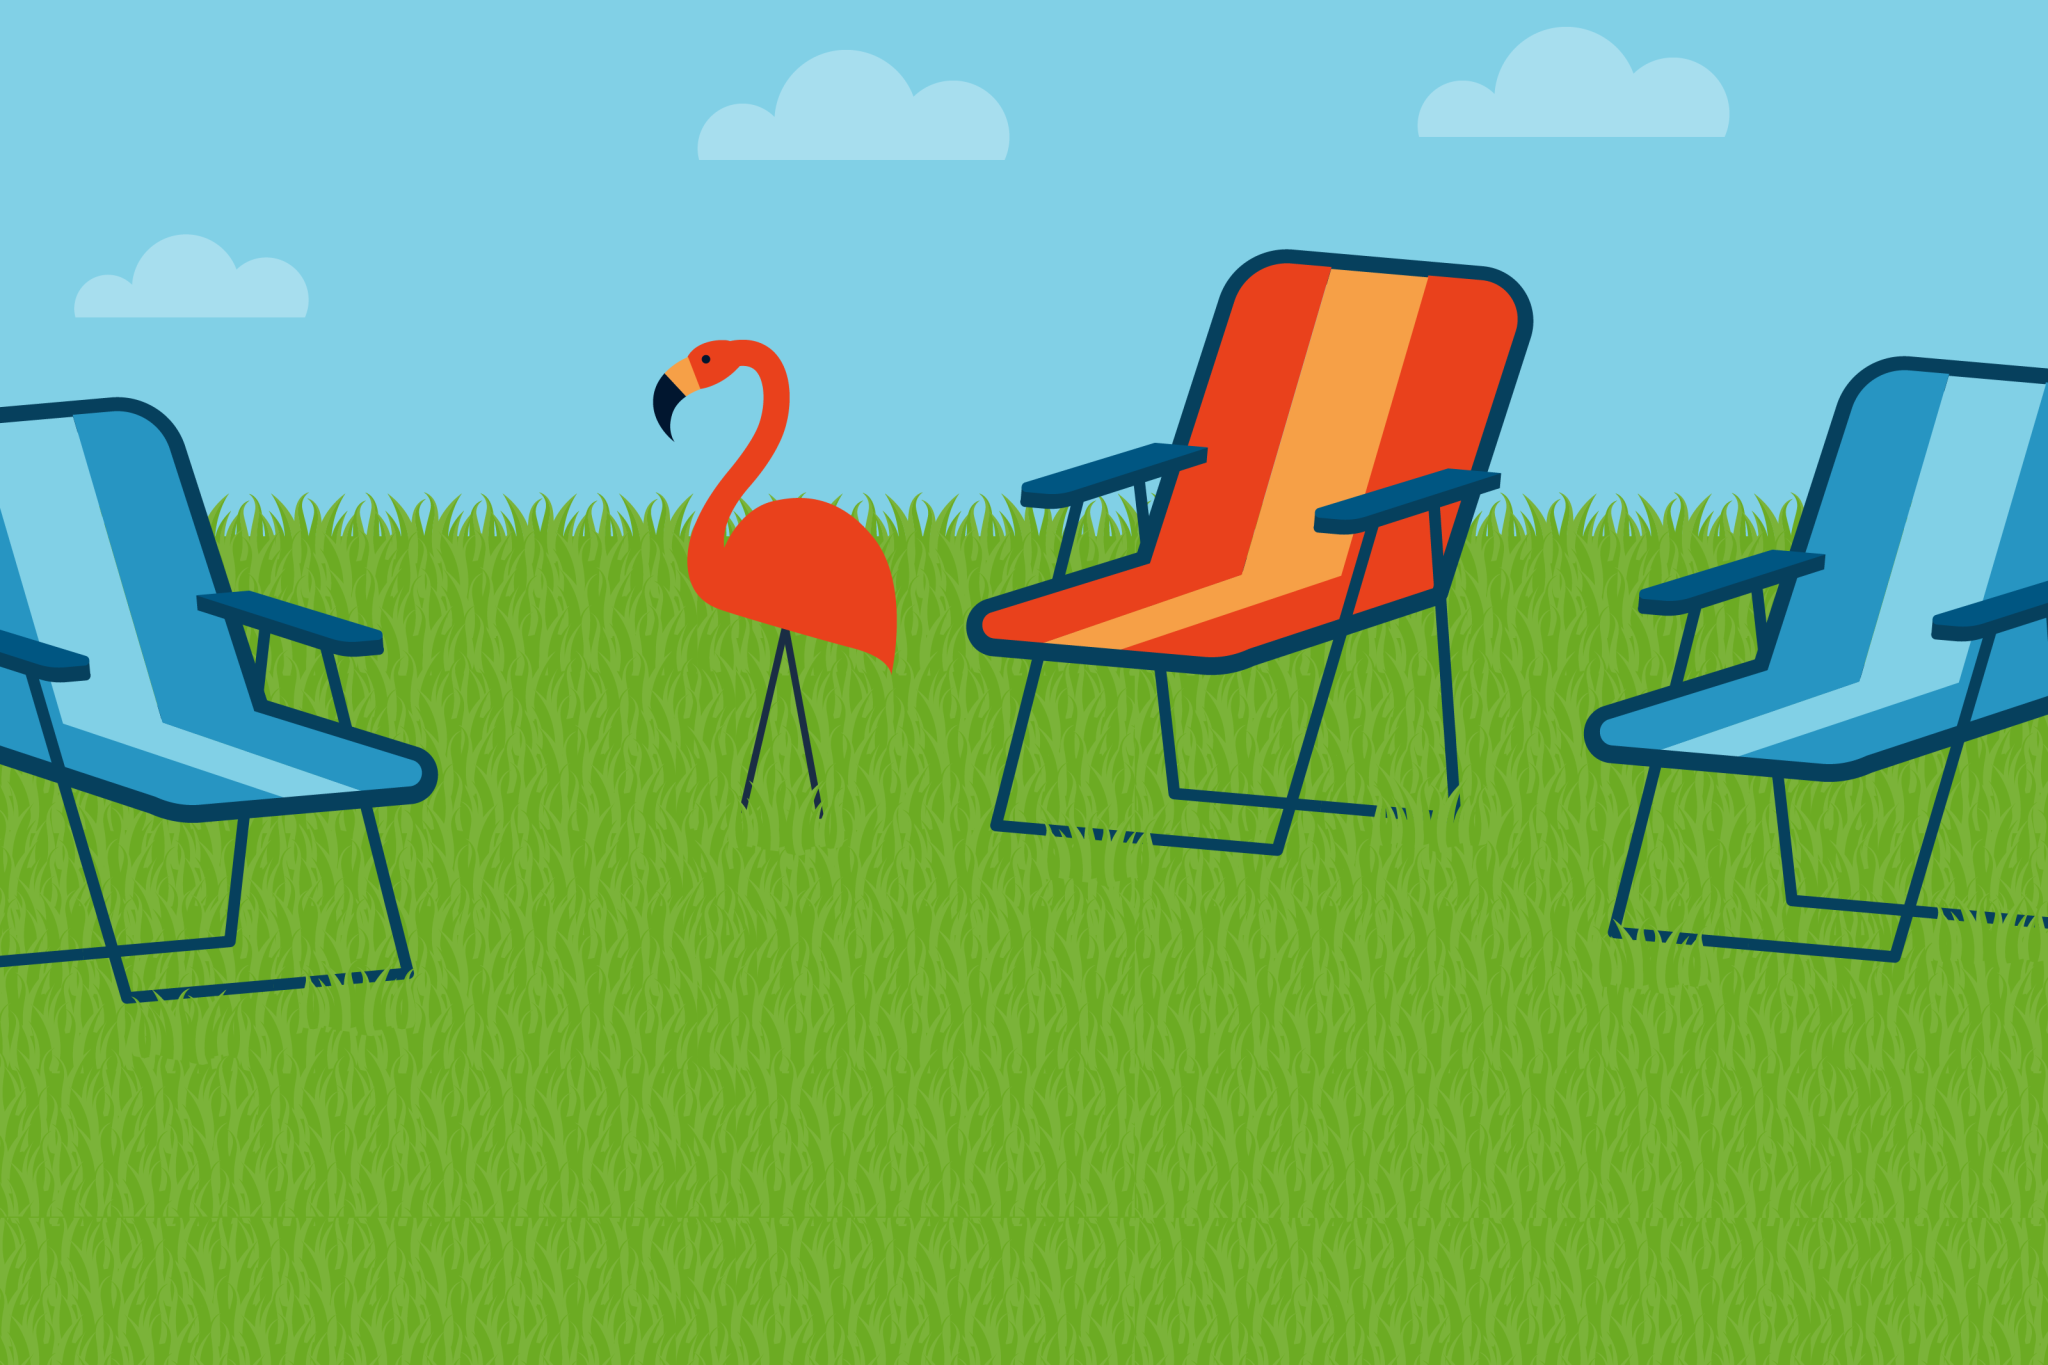 illustration of bright colored lawn chairs and a flamingo yard ornament on grass